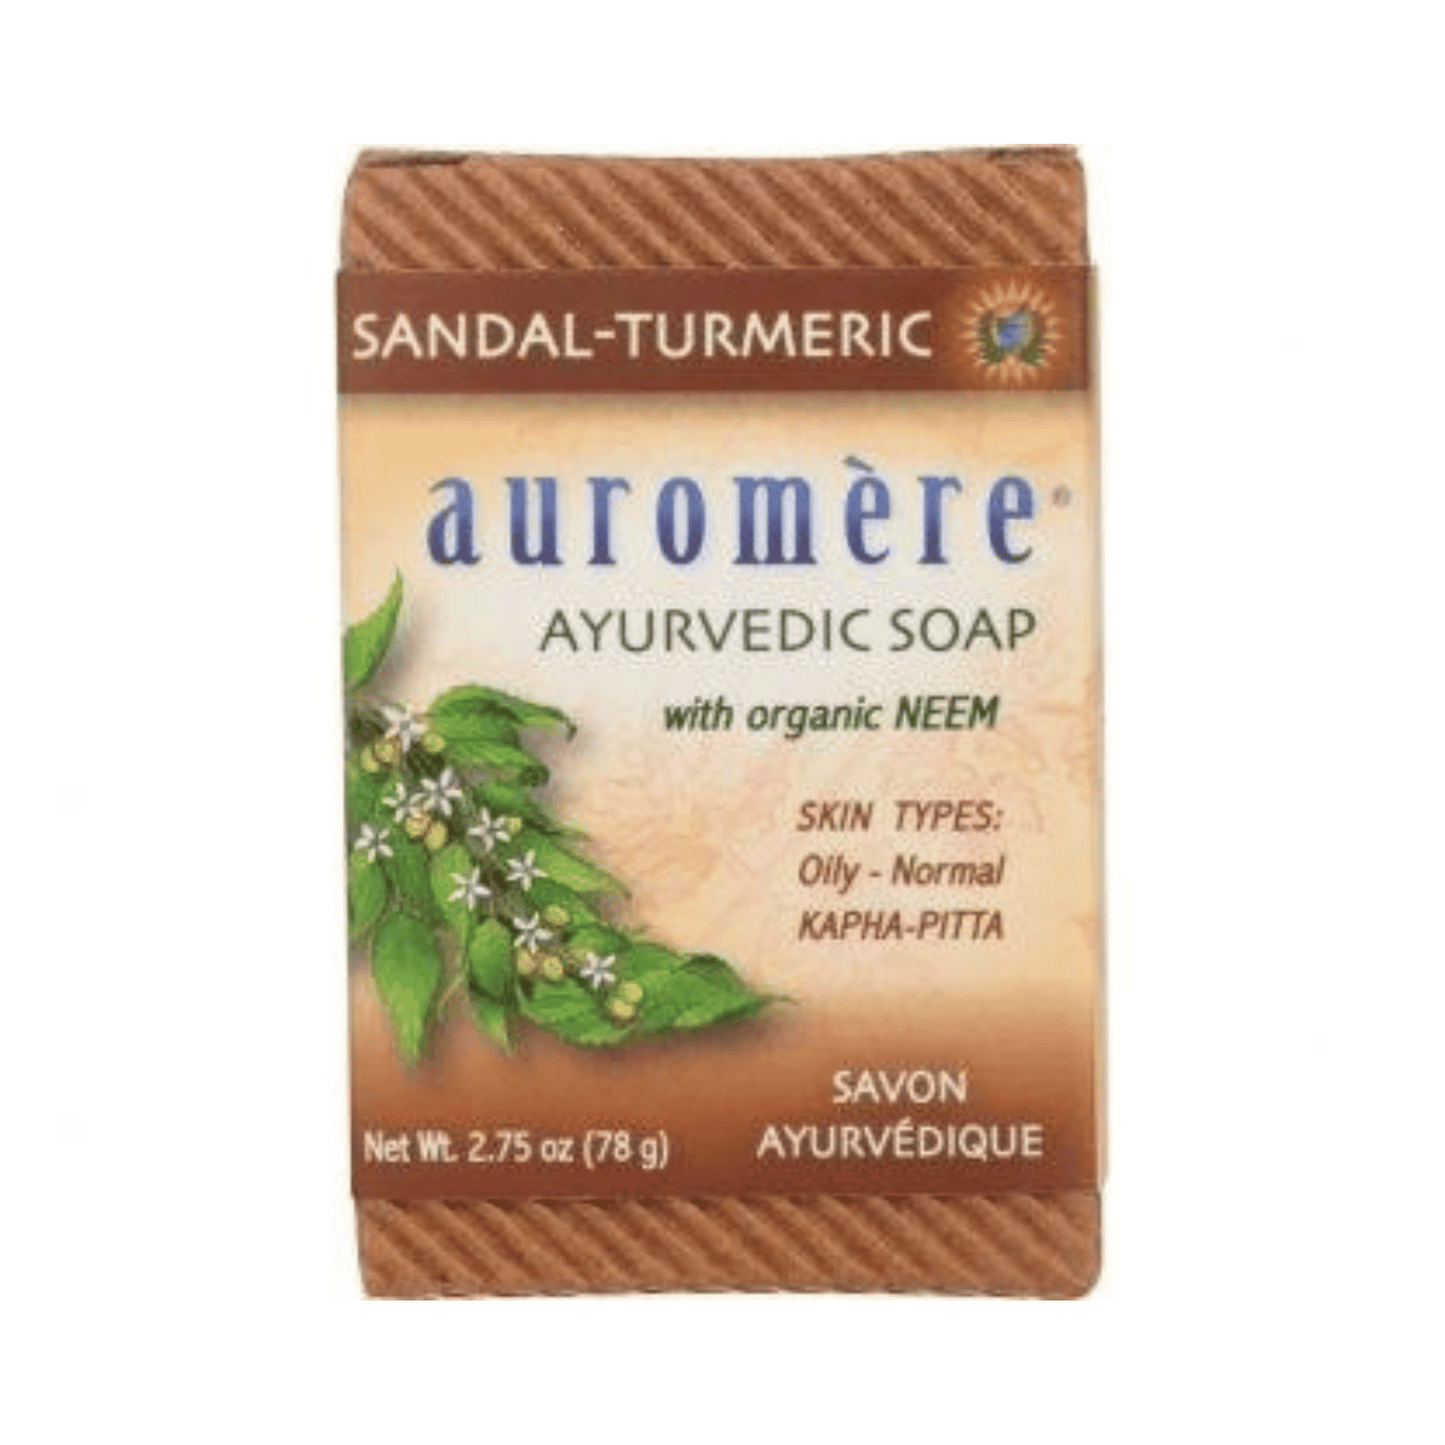 Primary Image of Sandal-Turmeric Soap